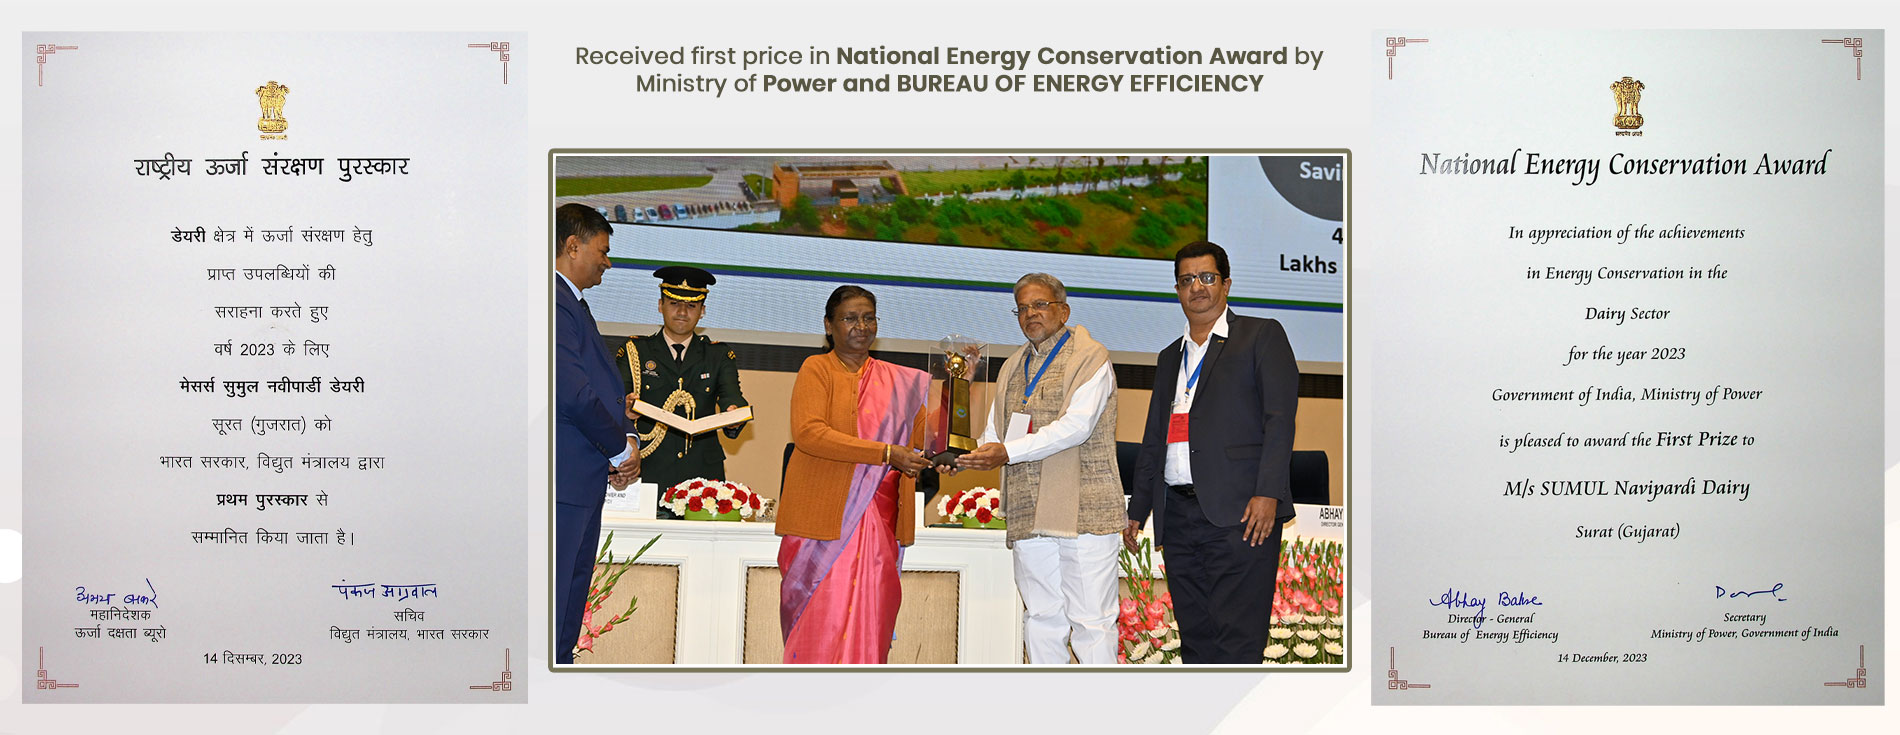 first price in National Energy Conservation Award